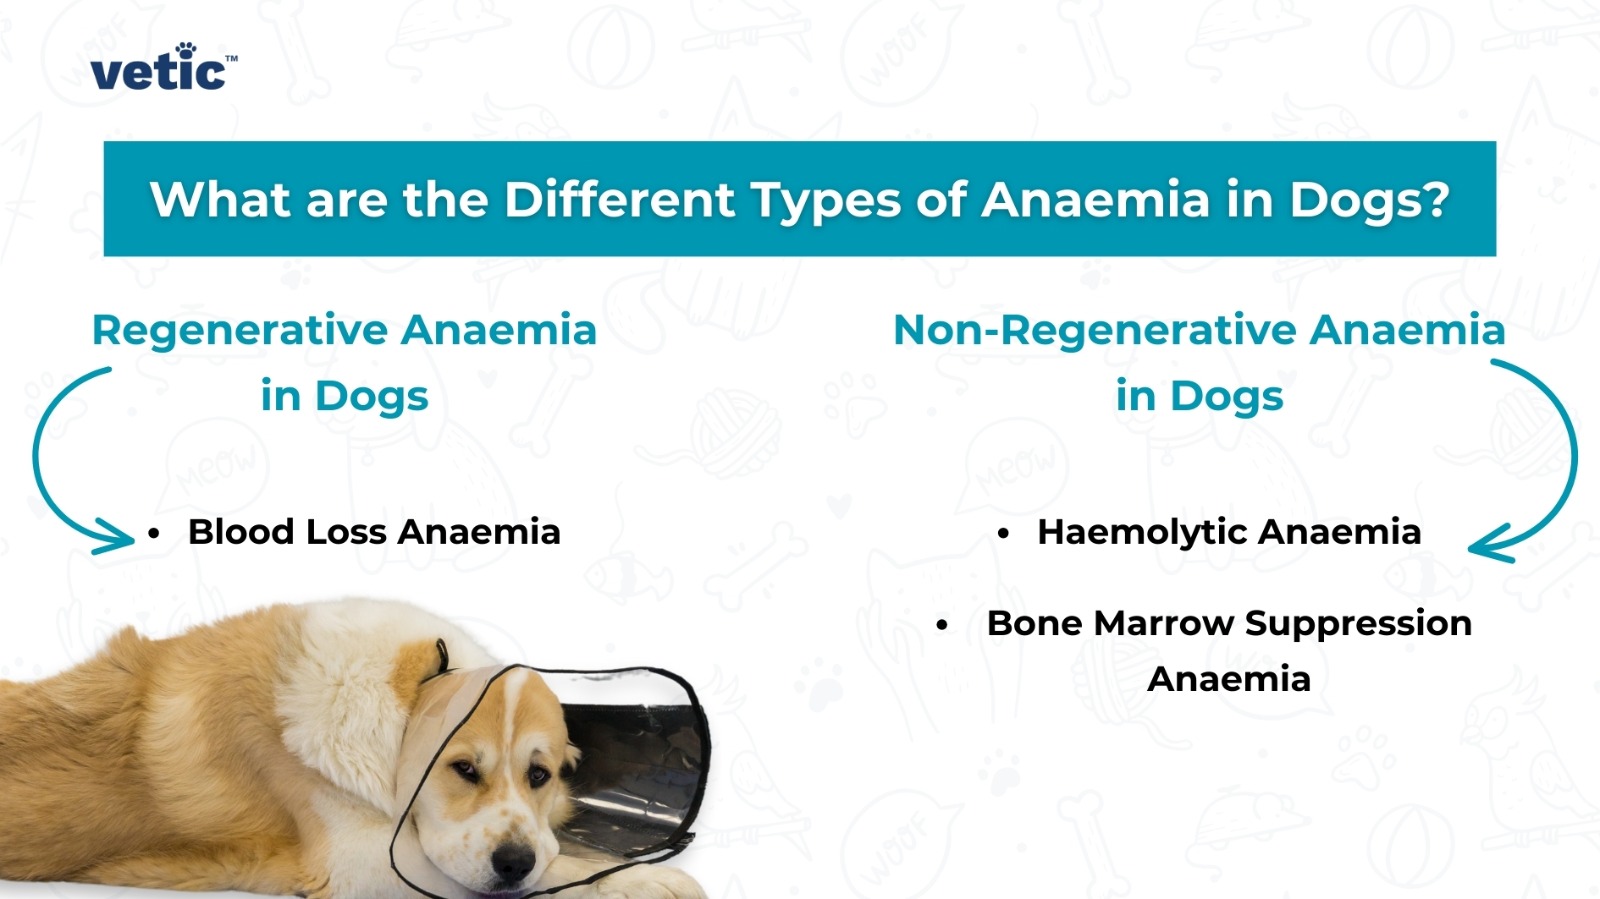 The image contains text from “vetic” at the top, followed by a question “What are the Different Types of Anaemia in Dogs?” Below this, there are two categories: “Regenerative Anaemia in Dogs” with a sub-item “Blood Loss Anaemia,” and “Non-Regenerative Anaemia in Dogs” with sub-items “Haemolytic Anaemia” and “Bone Marrow Suppression Anaemia.” There is also an image of a dog wearing a cone collar.